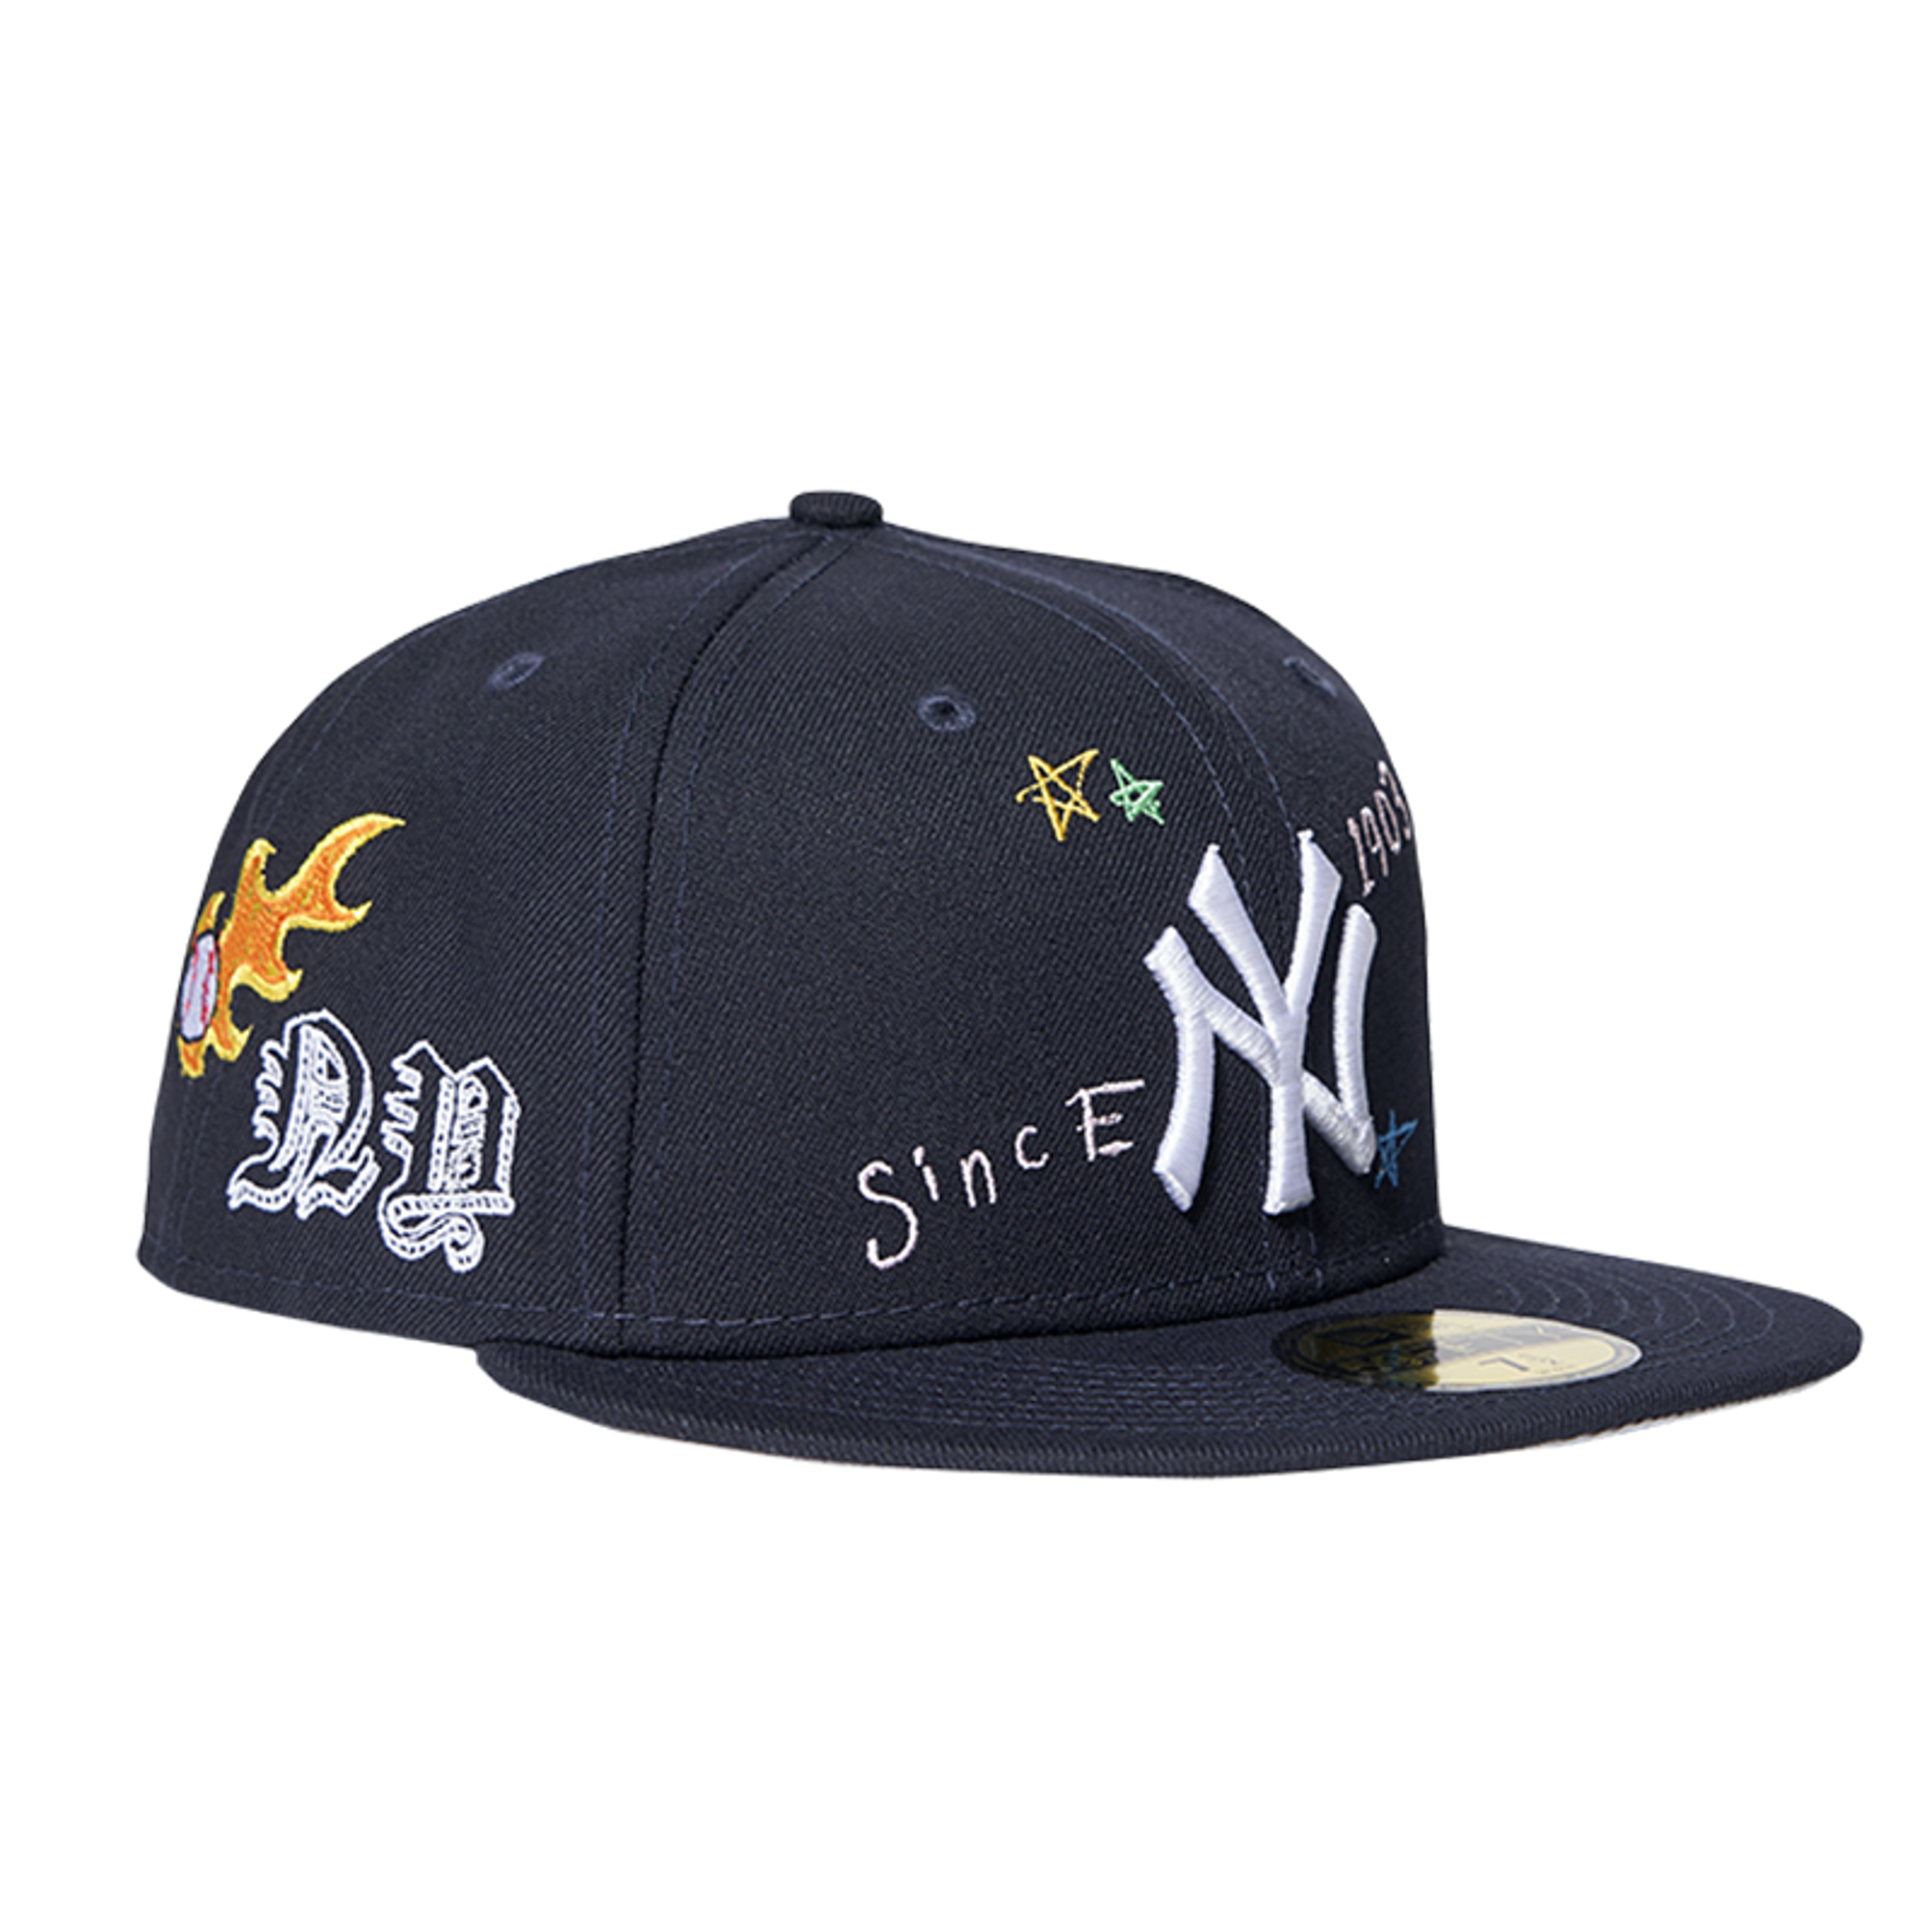 NY Yankee 7 1/2 all black fitted